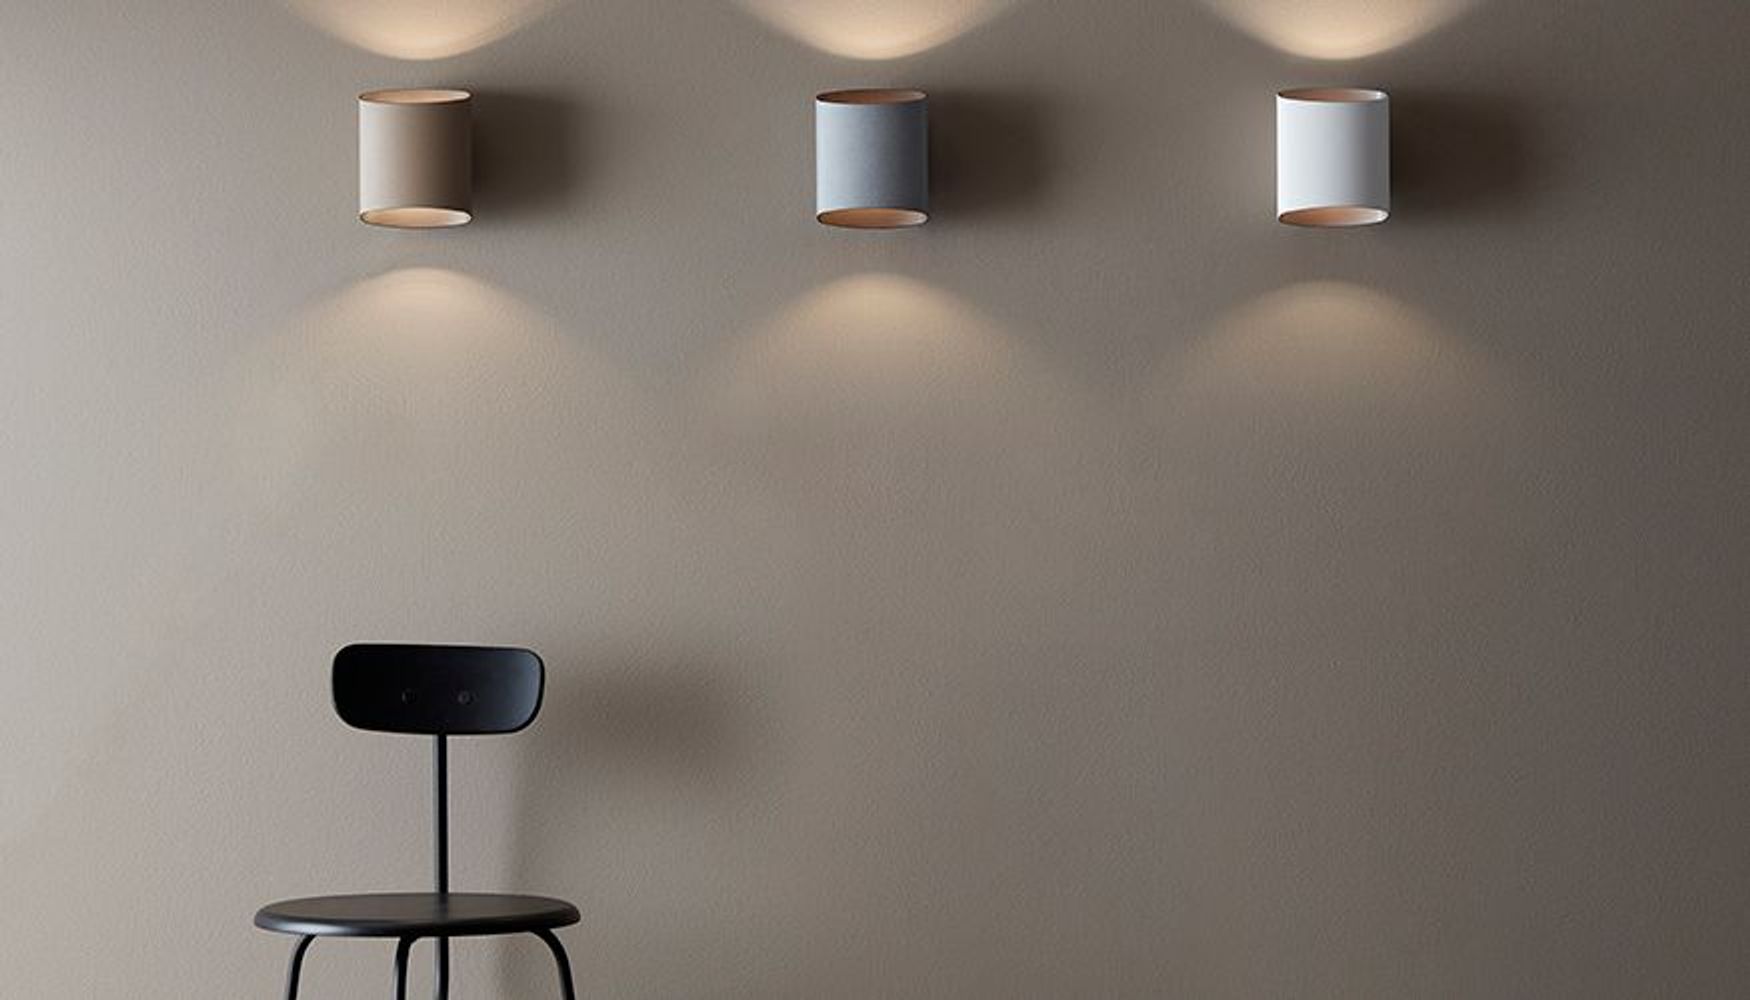 Three Signe wall lamps